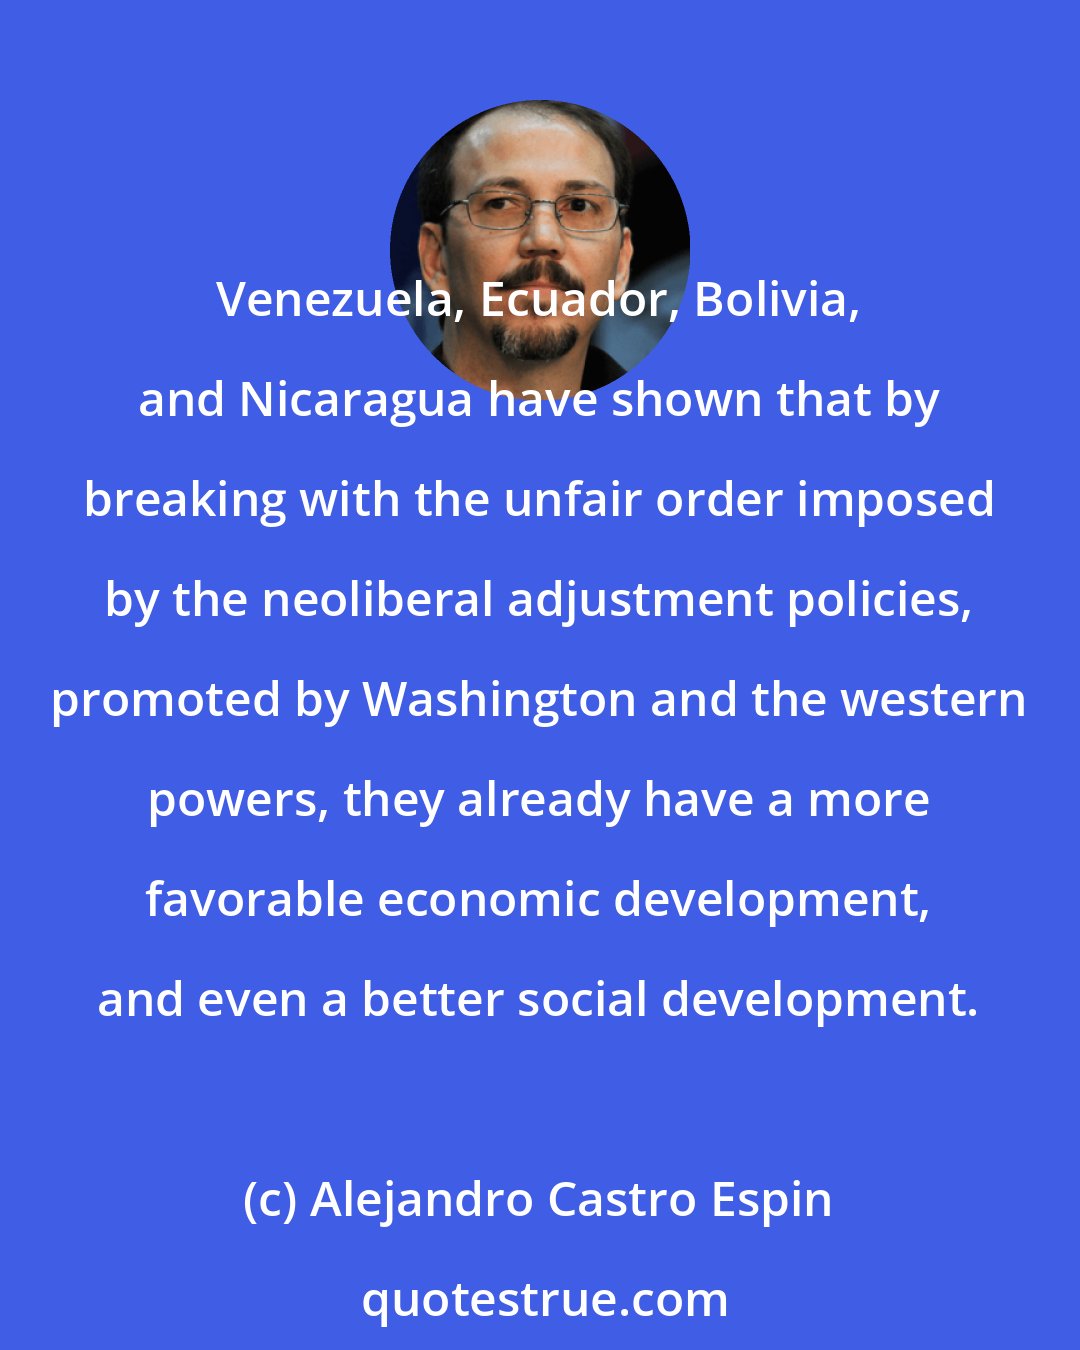 Alejandro Castro Espin: Venezuela, Ecuador, Bolivia, and Nicaragua have shown that by breaking with the unfair order imposed by the neoliberal adjustment policies, promoted by Washington and the western powers, they already have a more favorable economic development, and even a better social development.